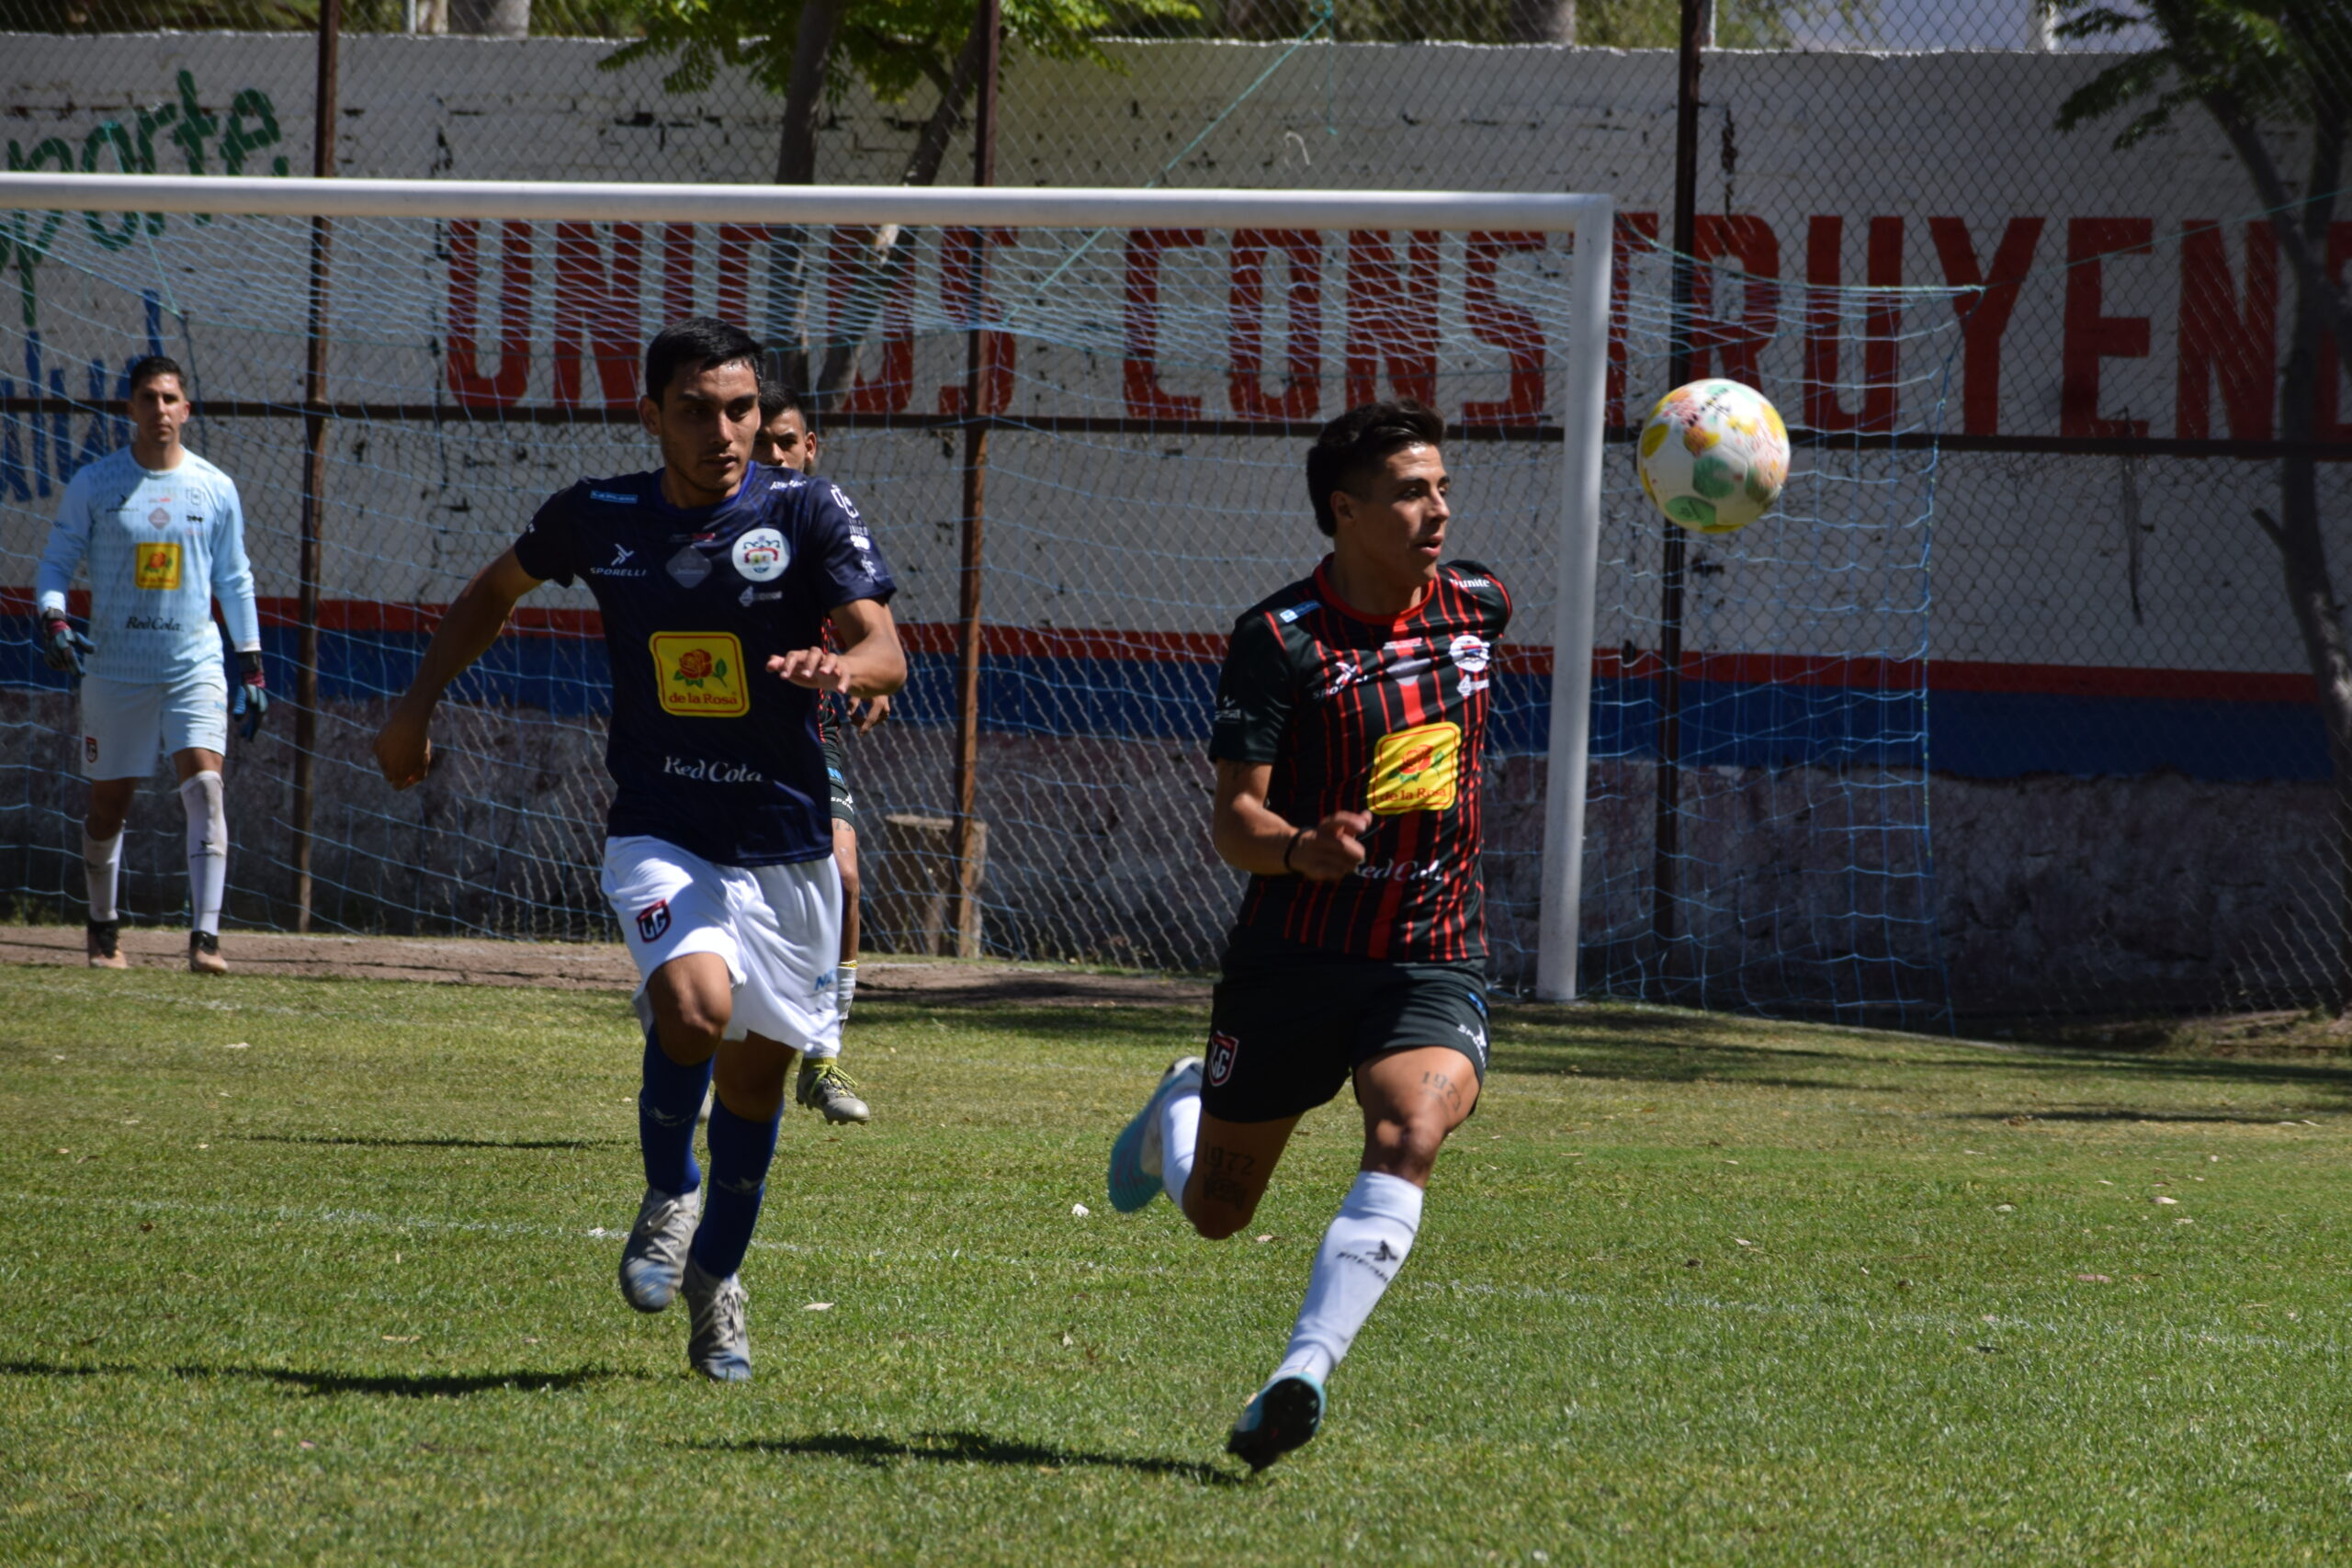 Jocotepec wins the Jalisco Cup River Classic 2-1 The match was very intense